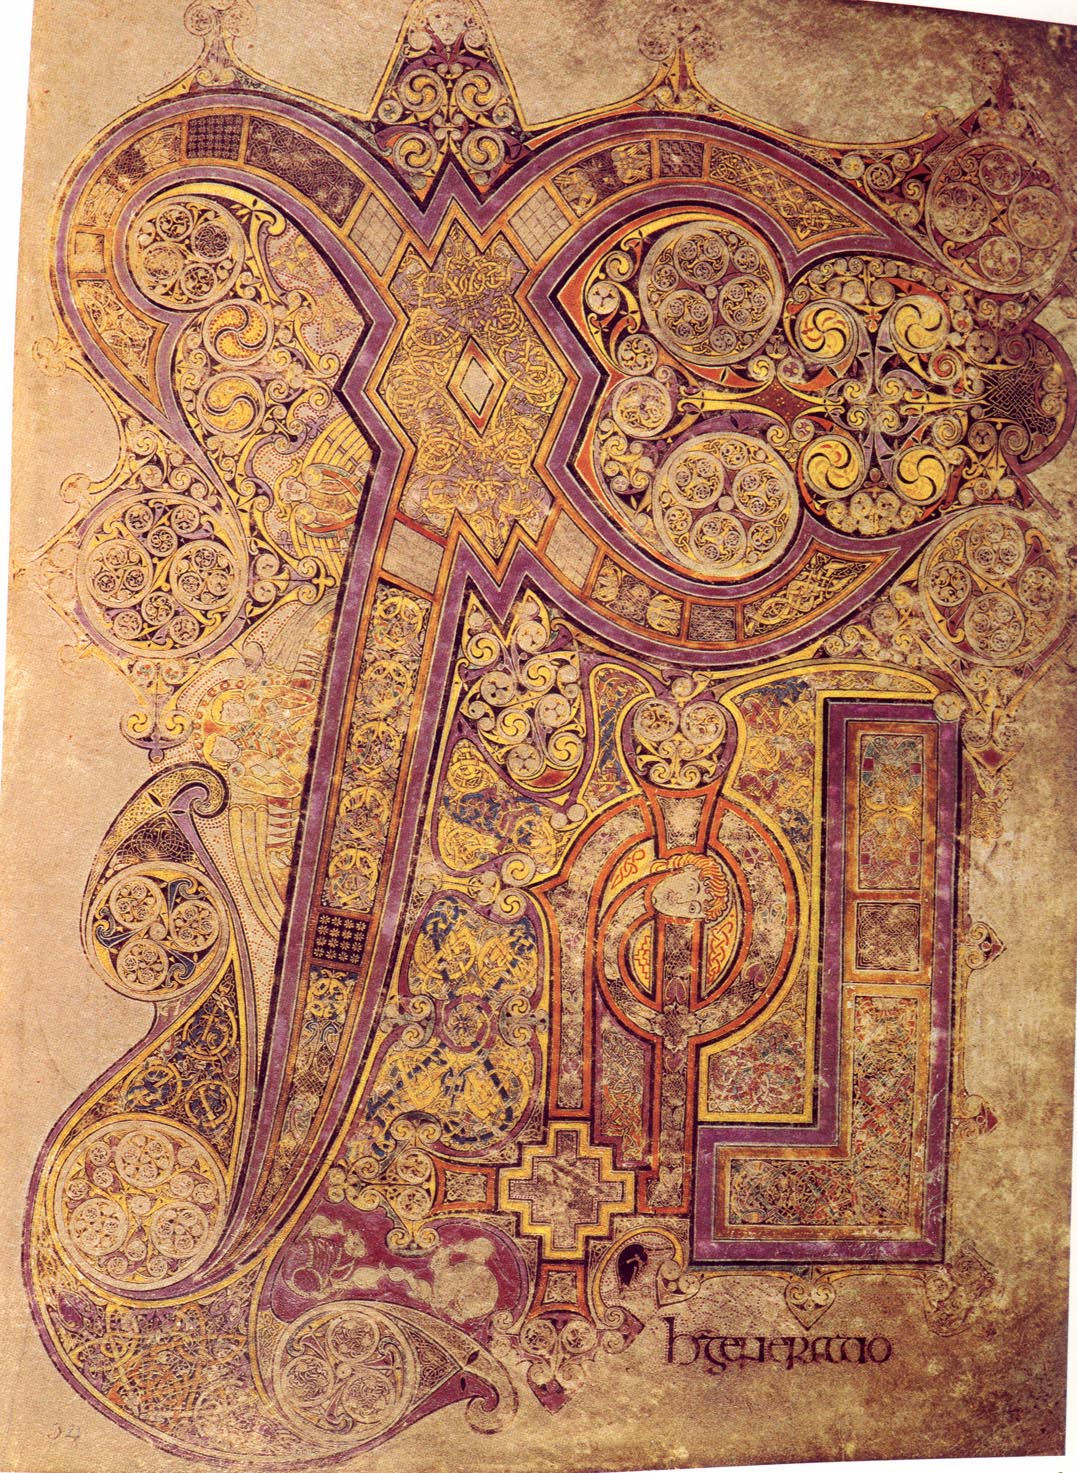 Chi Rho Page From The Book Of Kells: The Word Made Flesh